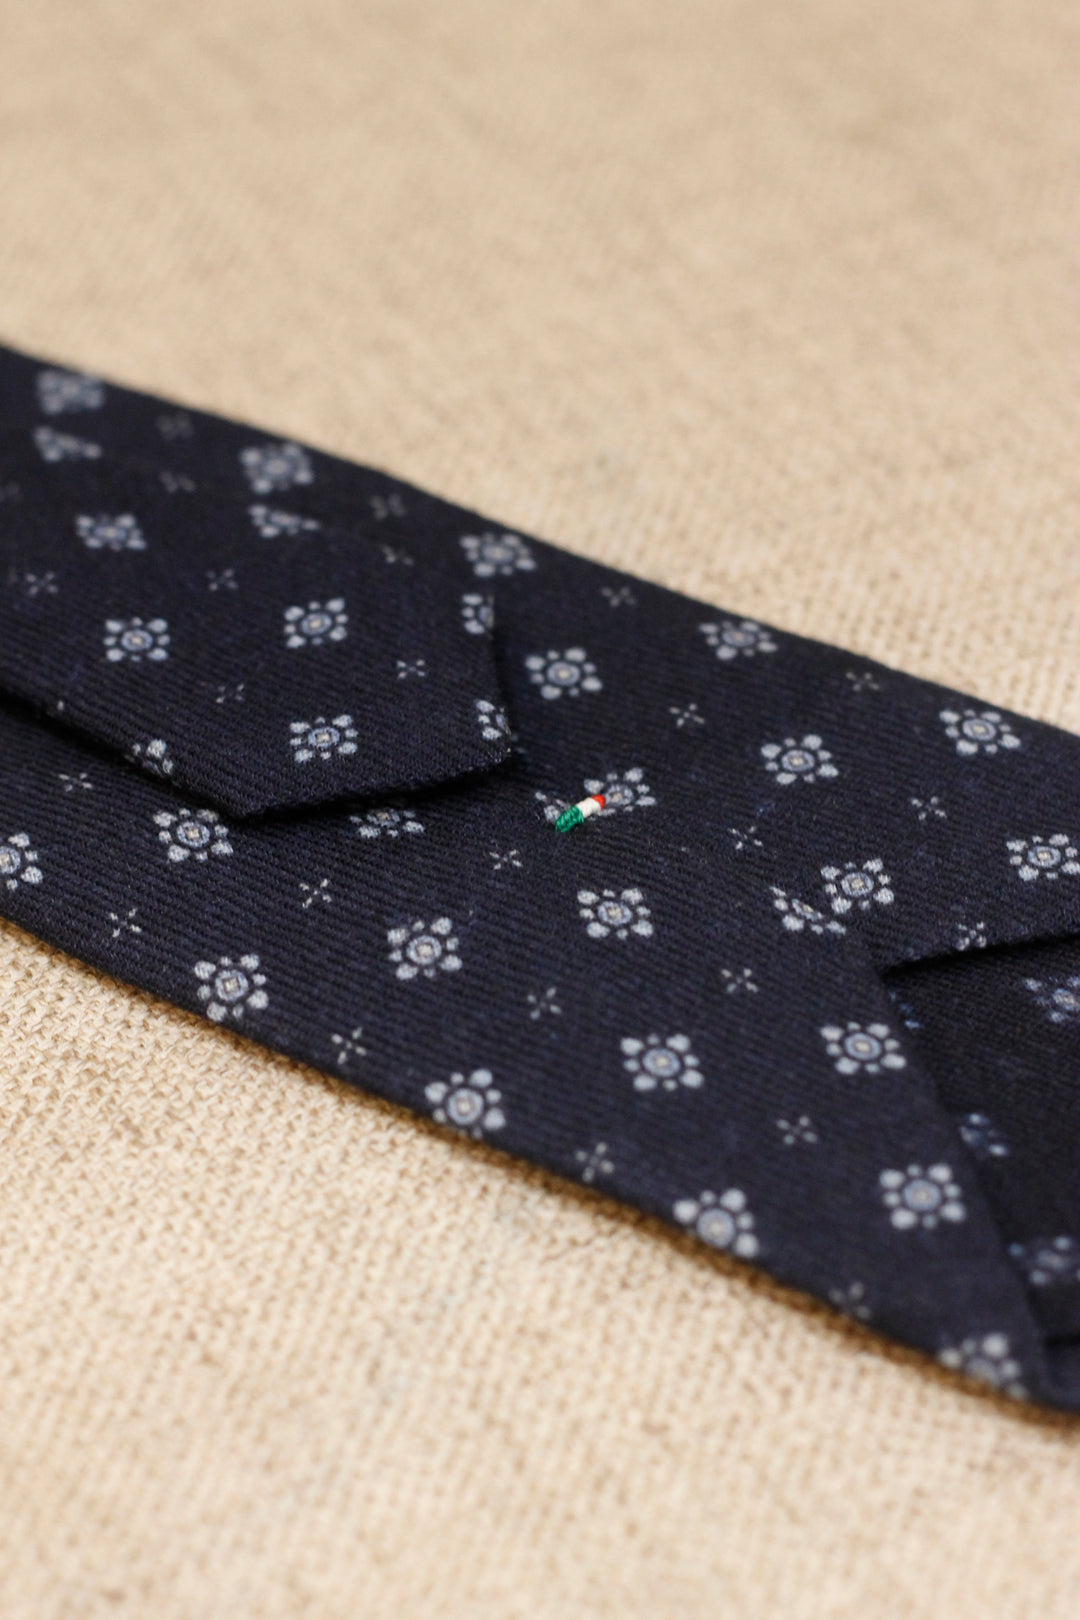 Napoli WOOL Tie Navy Blue Light Blue and White Geometry